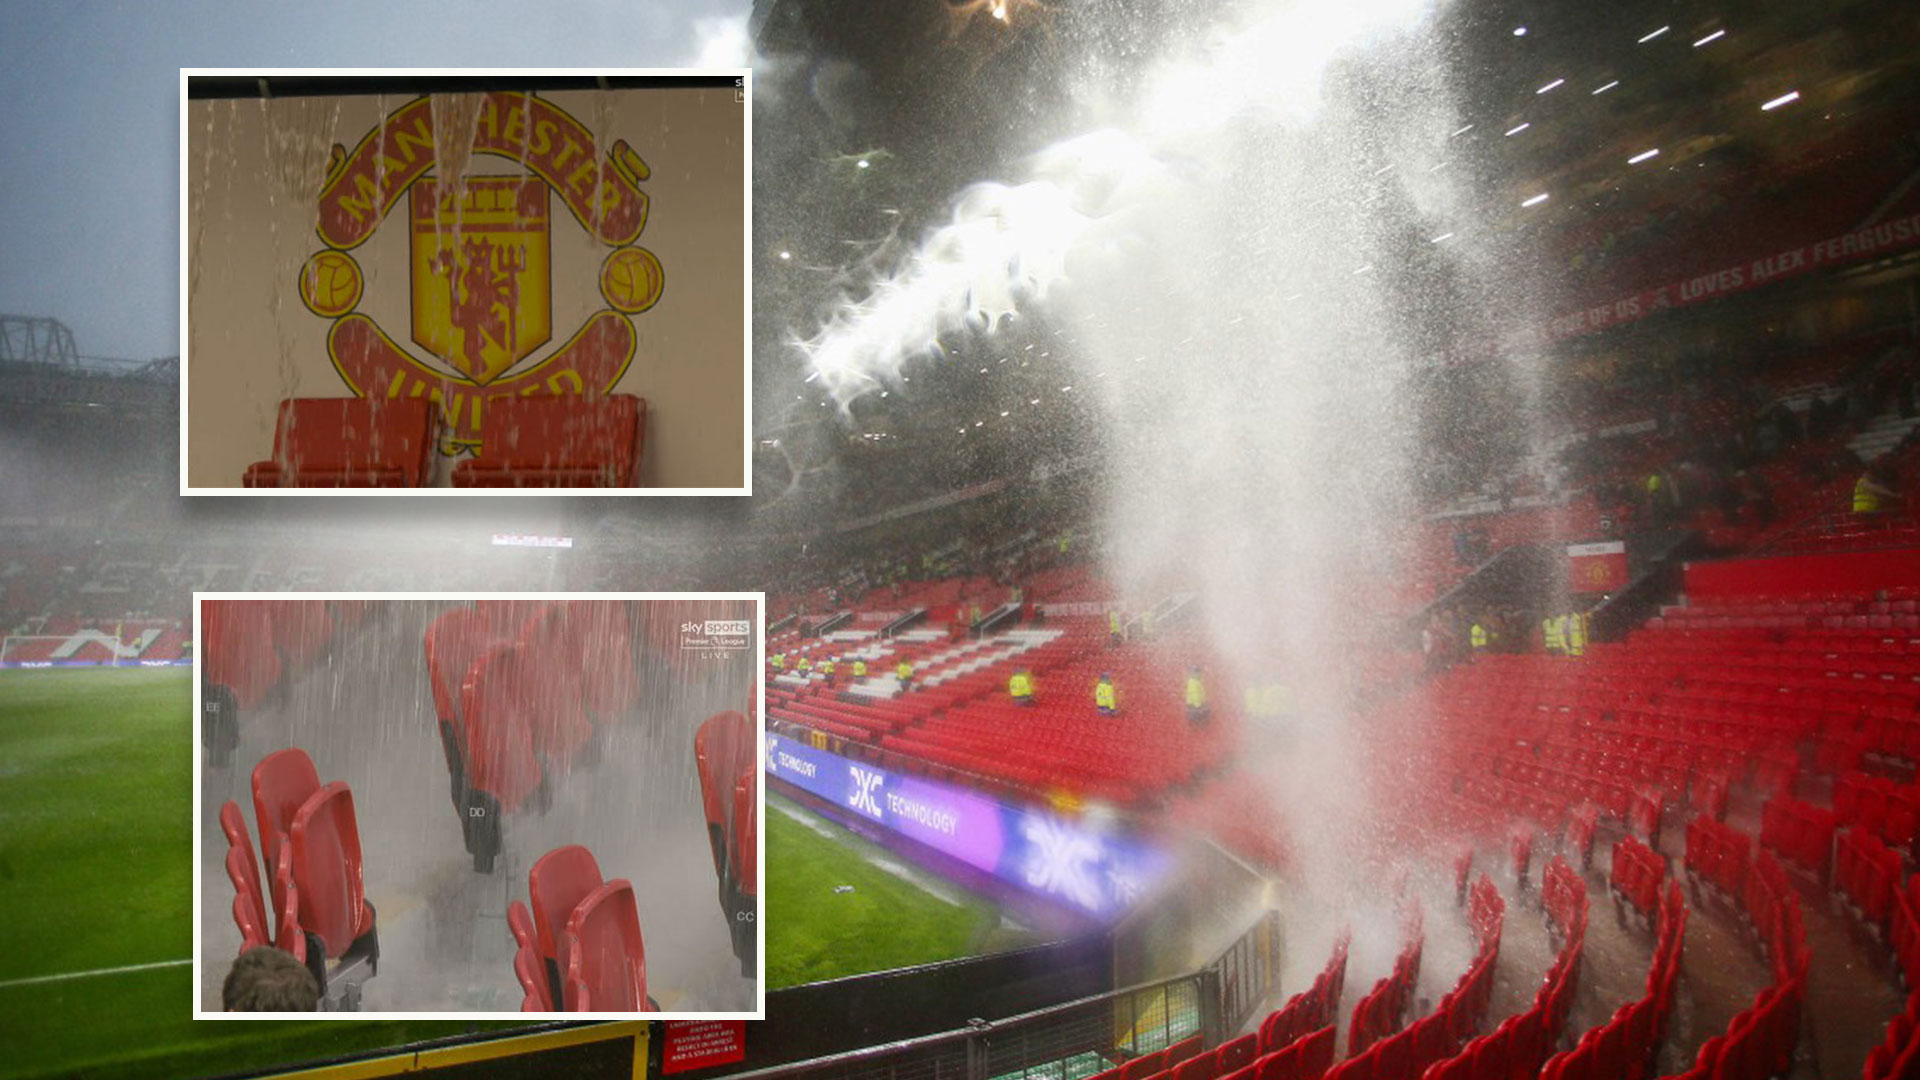 Man Utd's issues laid bare as waterfall floods through Old Trafford roof